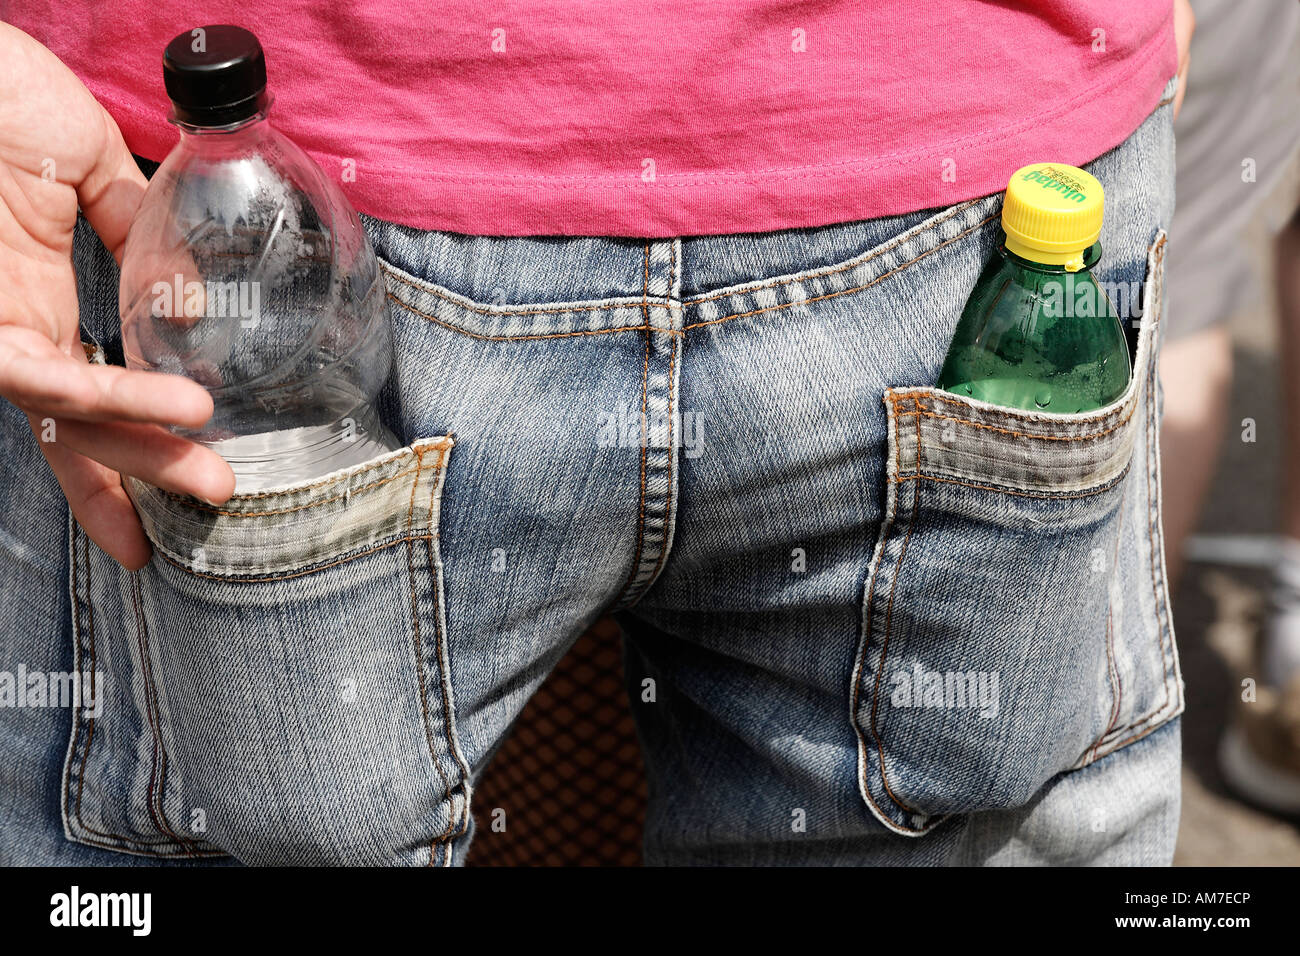 Two plastic bottles put into back pockets of jeans, Loveparade 2007, Essen,  NRW, Germany Stock Photo - Alamy